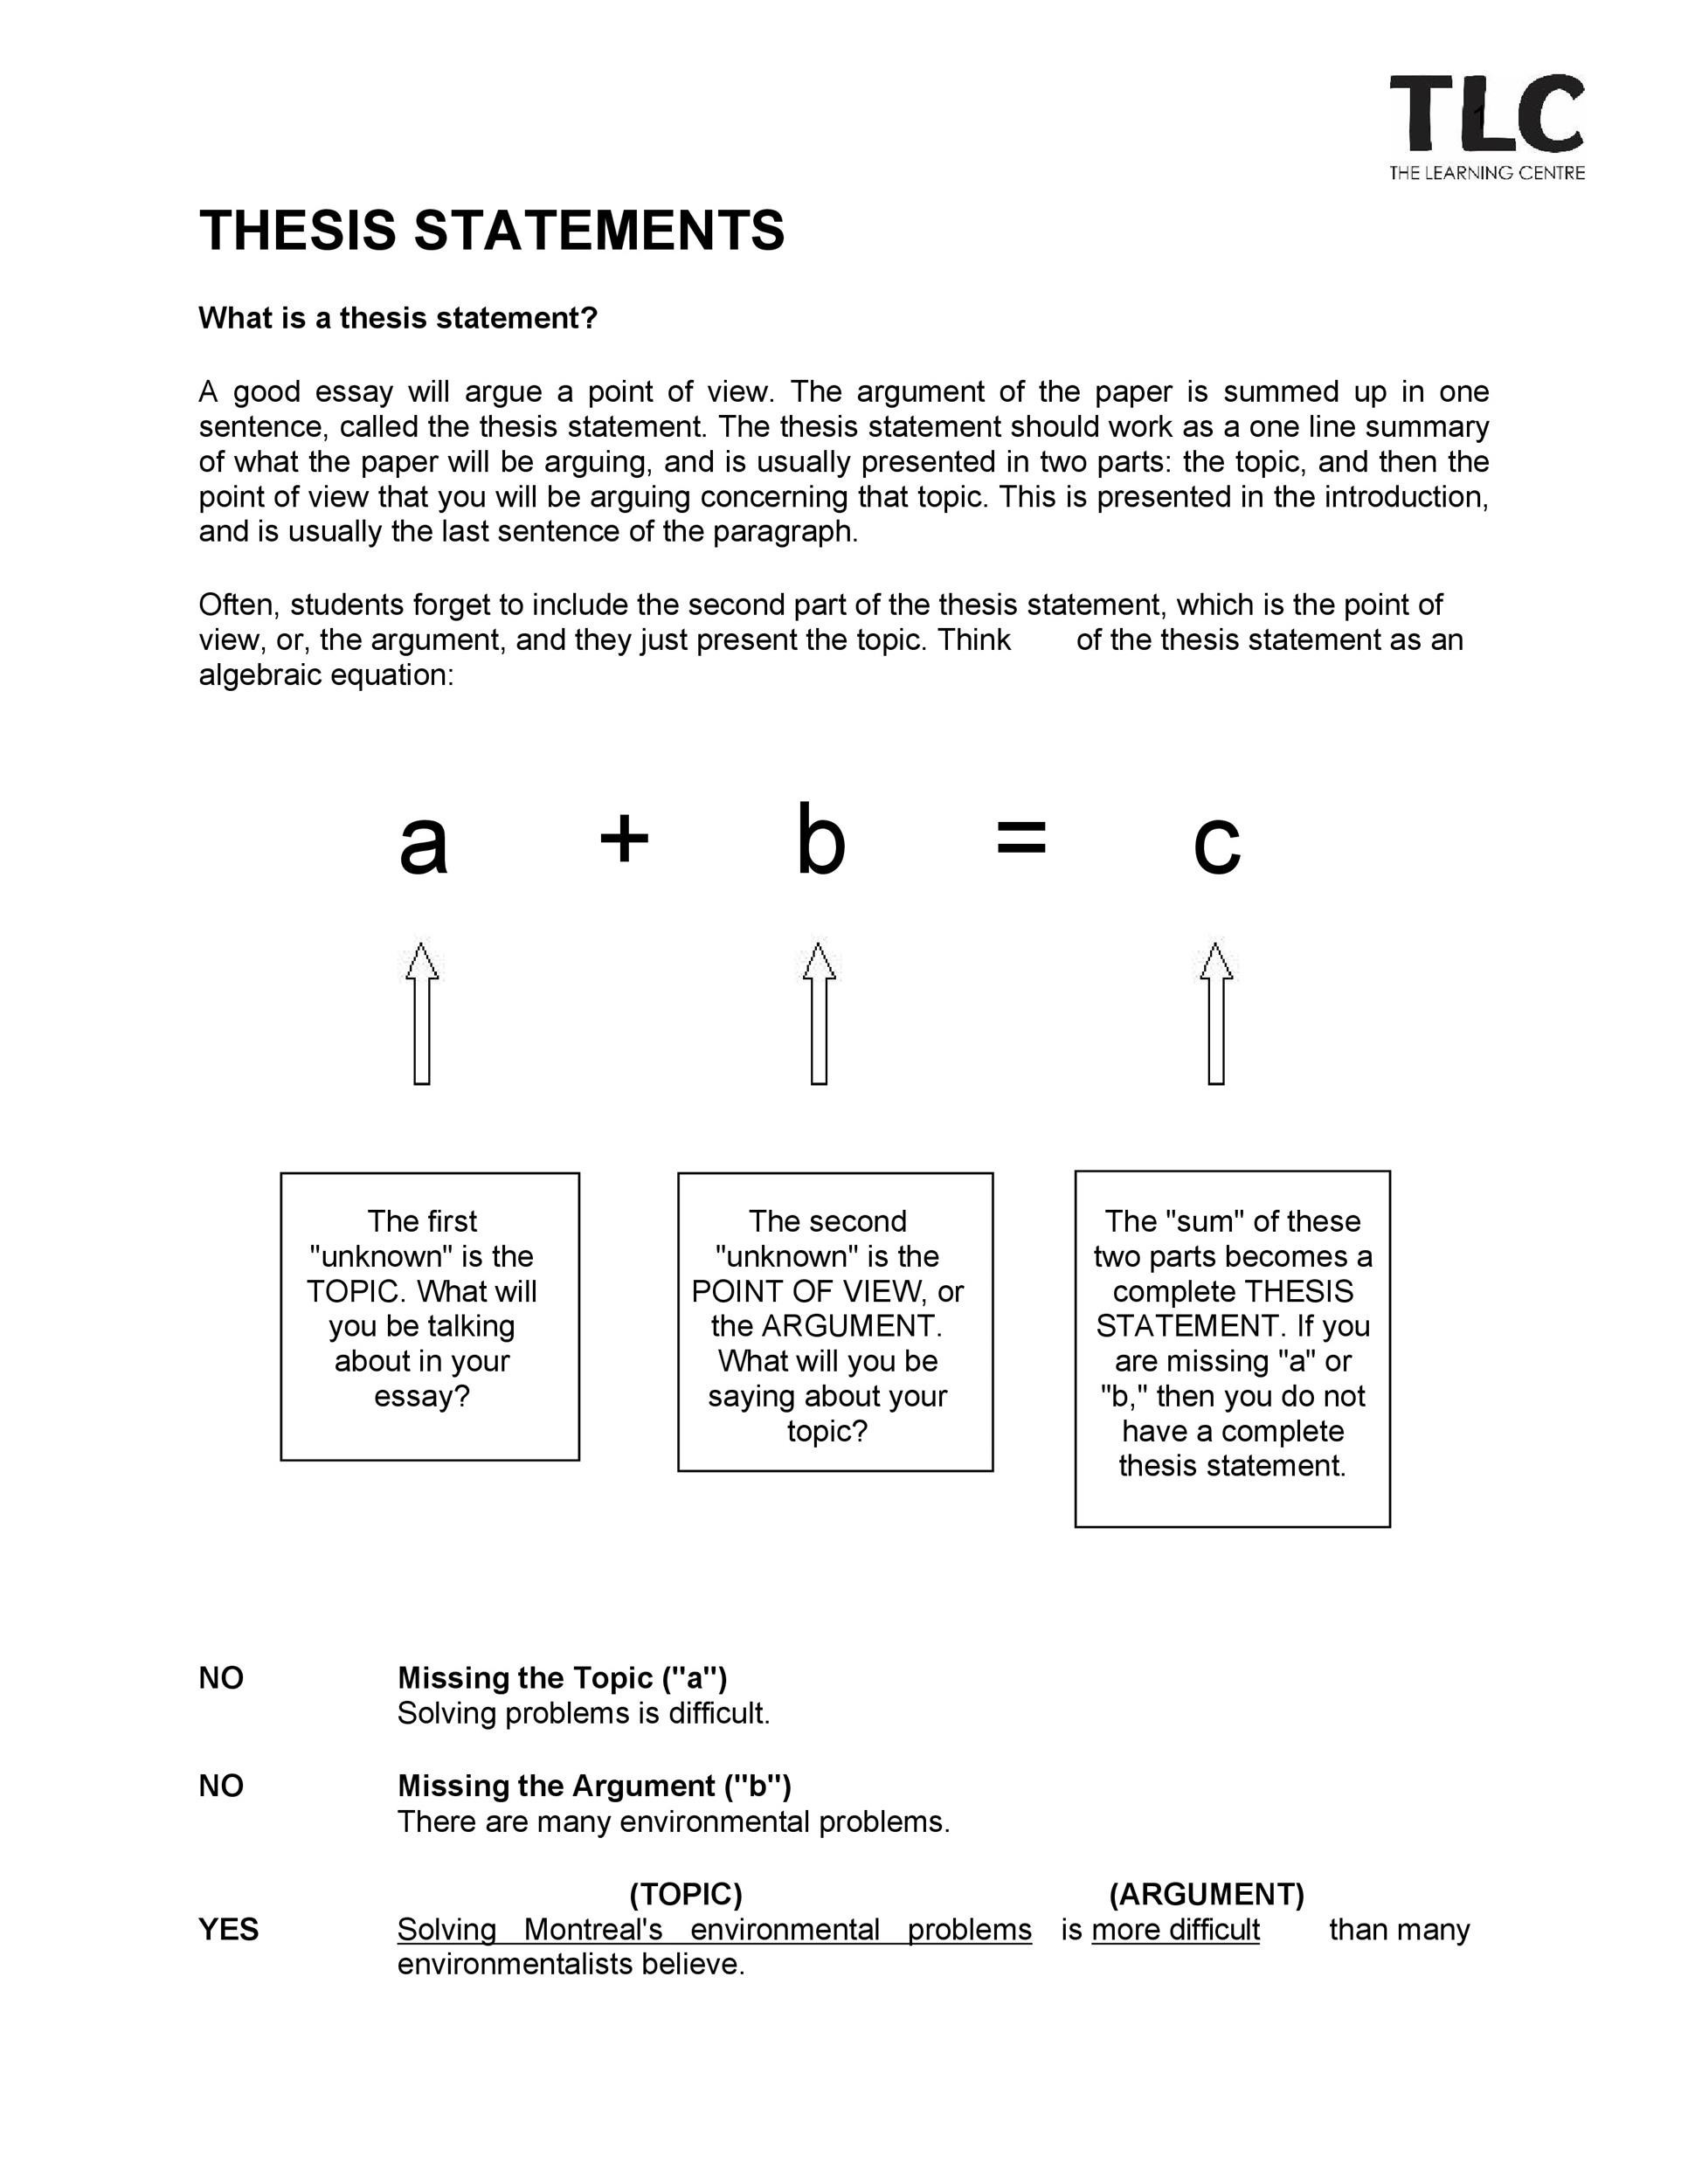 Free thesis statement template 42